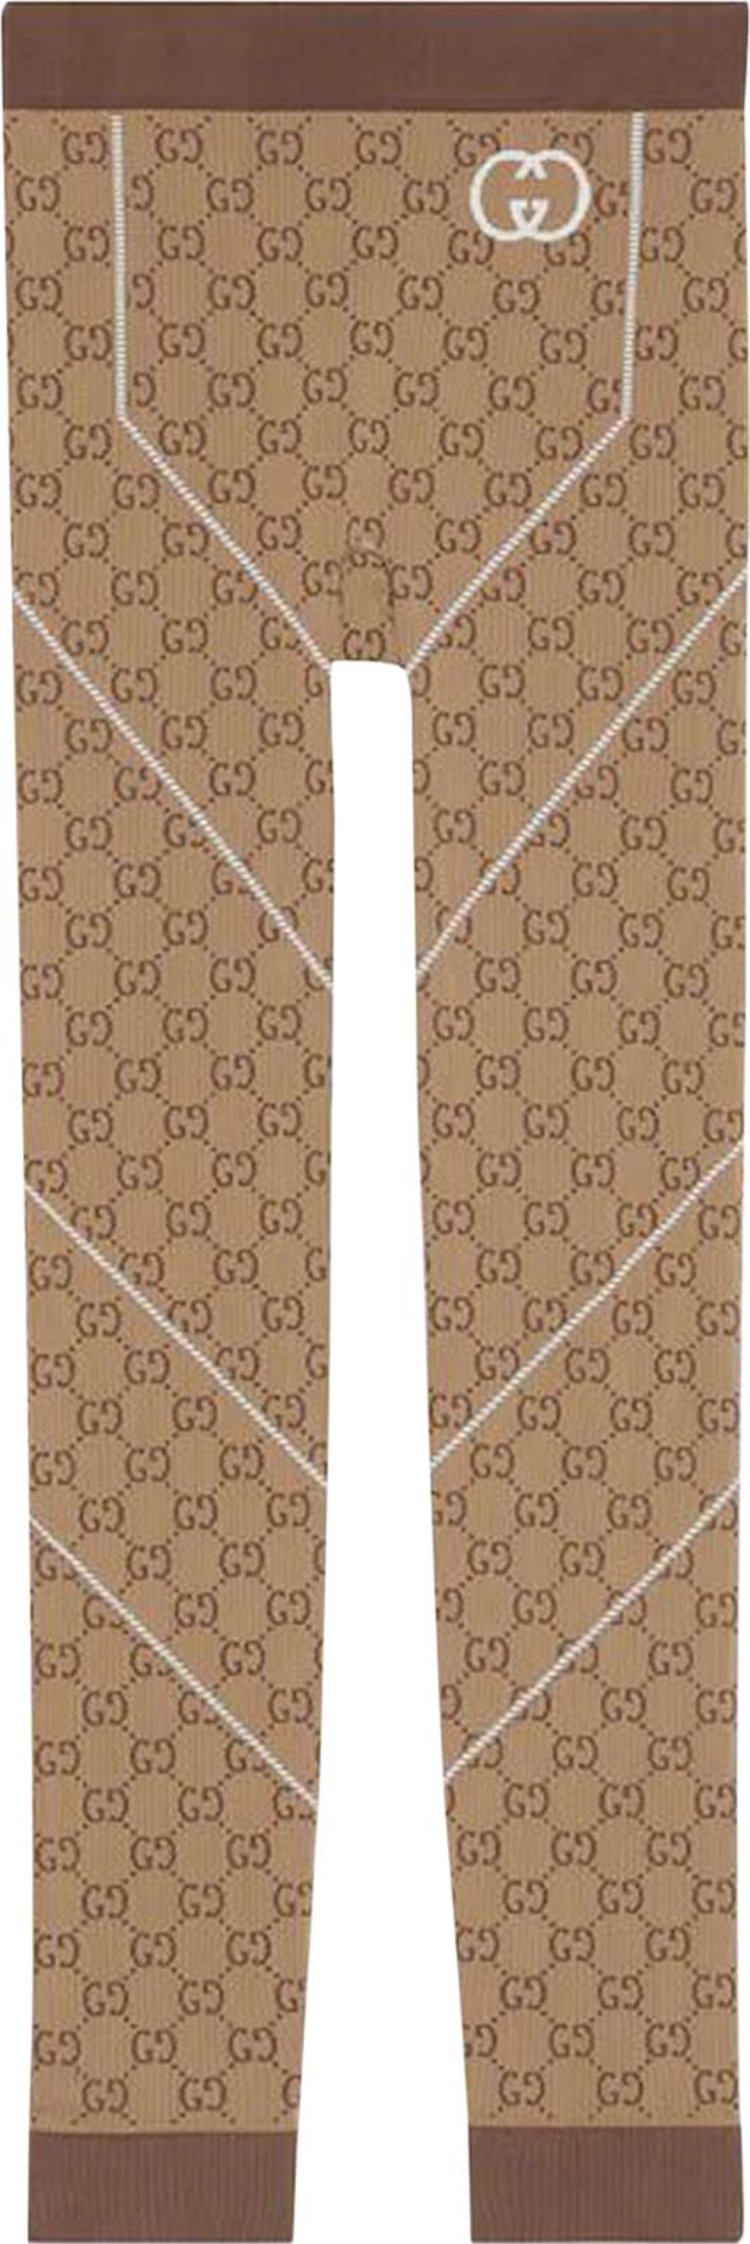 Gucci Women Gg Jacquard Wool Leggings ($1,085) ❤ liked on Polyvore  featuring pants, leggings, beige, brown pants, patterned leggings, gucci  leggings, elastic wa…